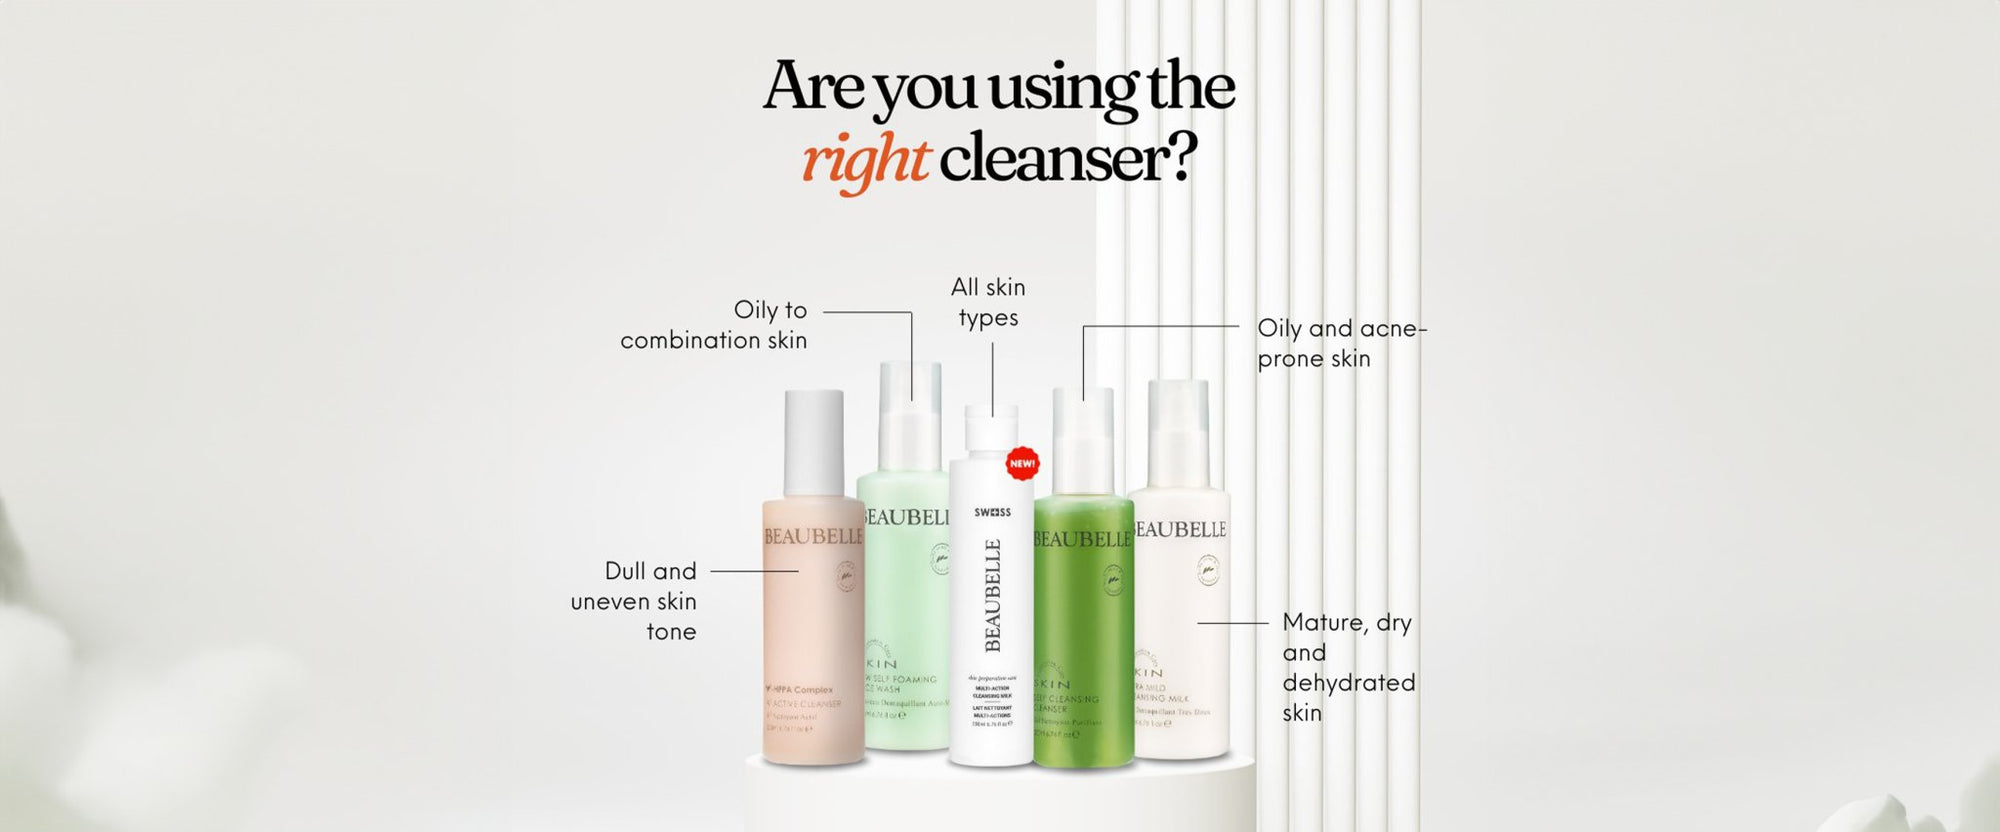 Beaubelle Cleanser for your skin - Beaubelle Asia-Pacific